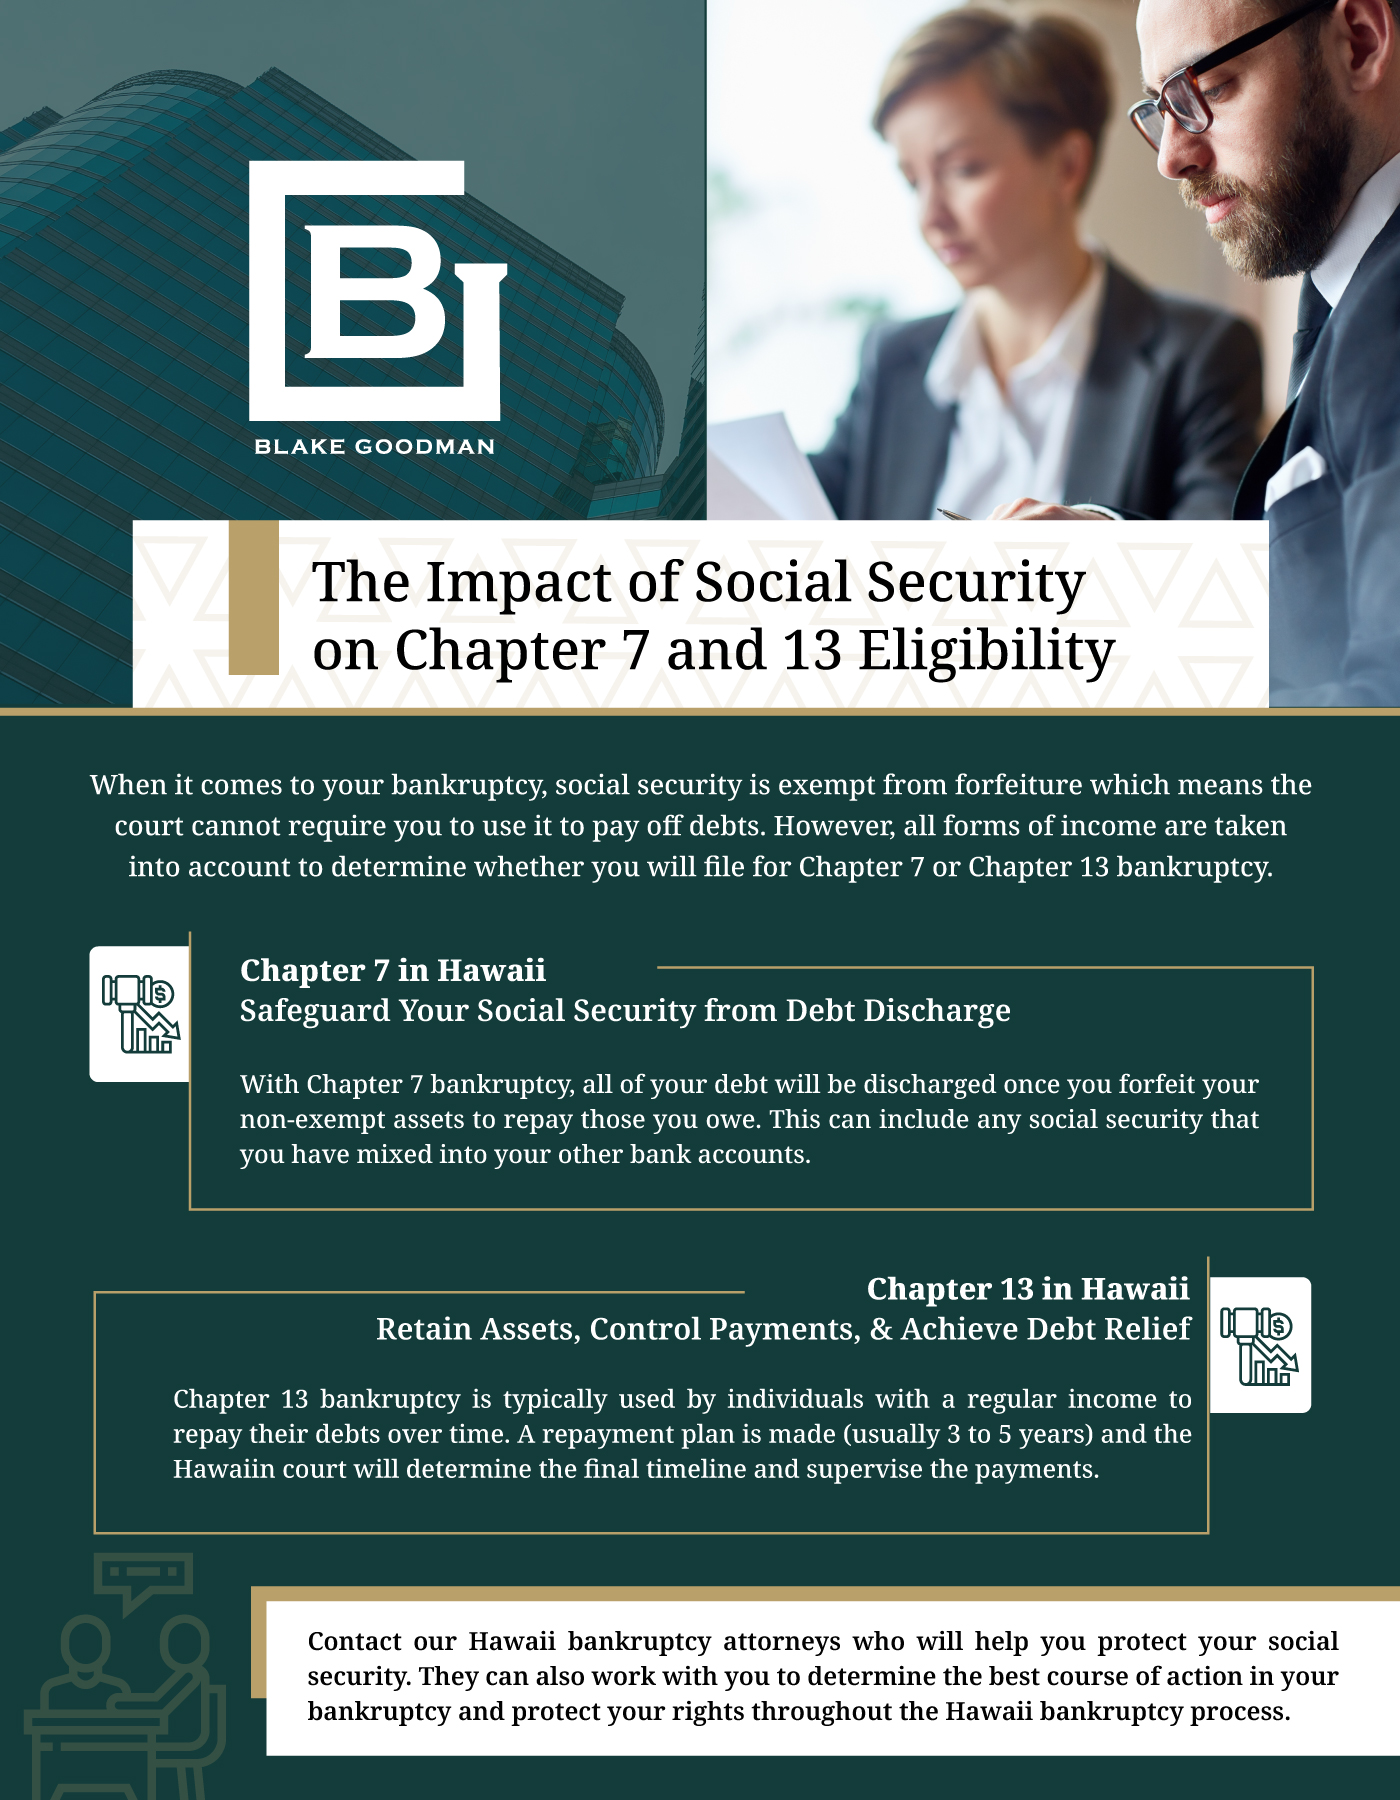 An infographic that shows the impact of social security on chapter 7 and 13 eligibility